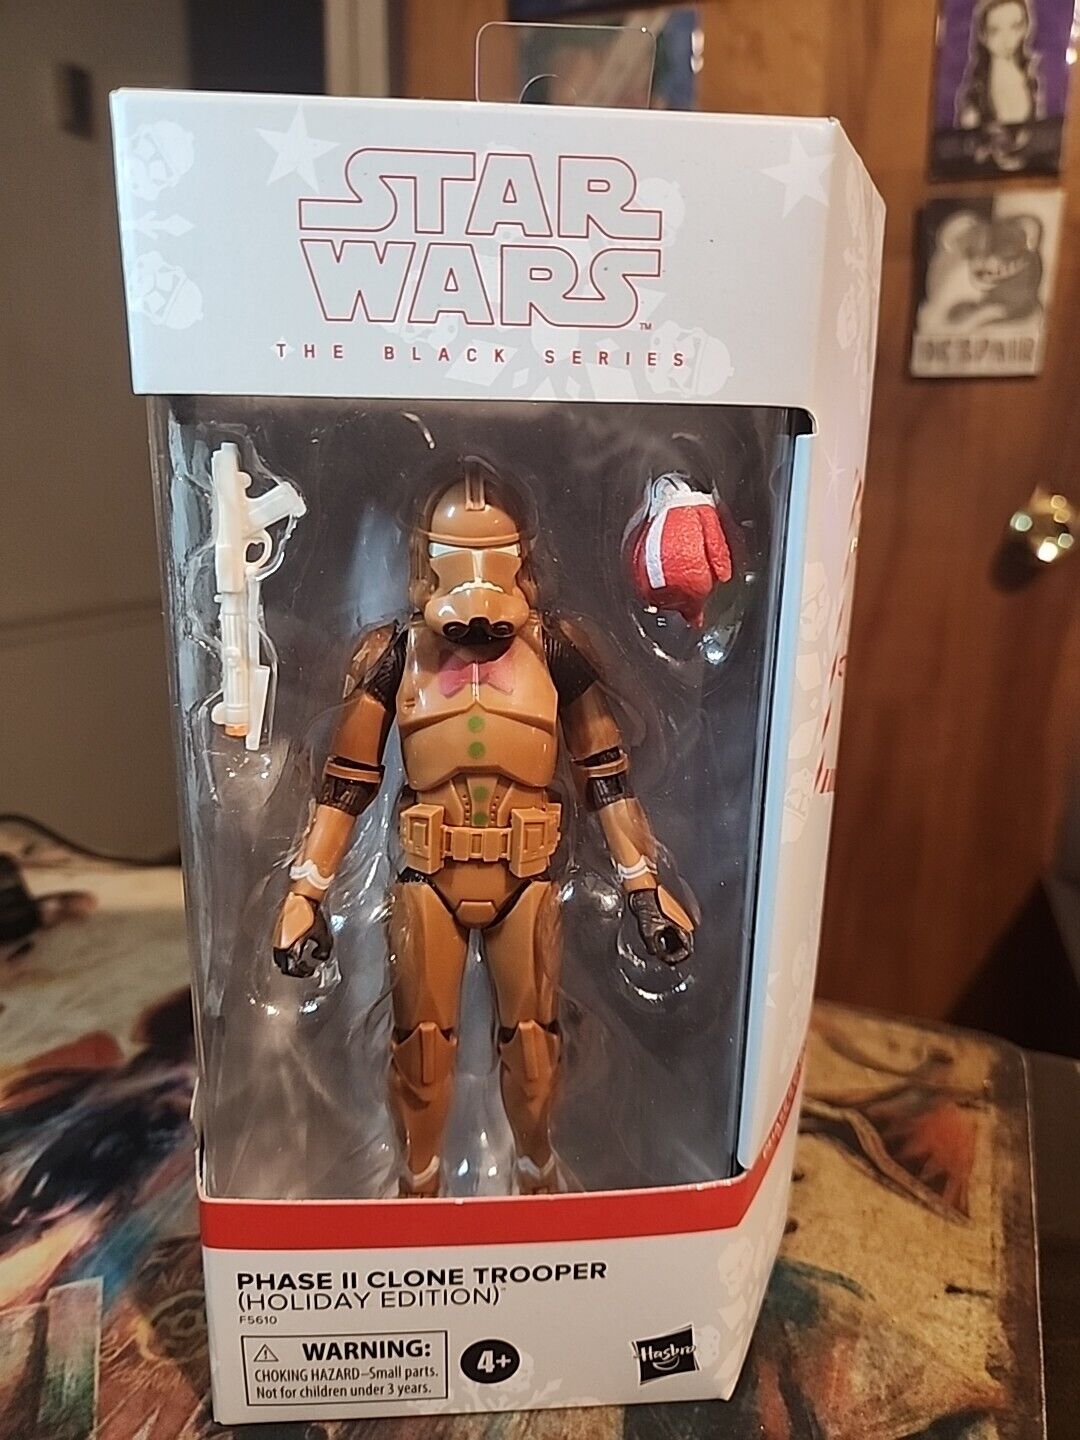 Star Wars black series Phase II Clone Trooper holiday edition